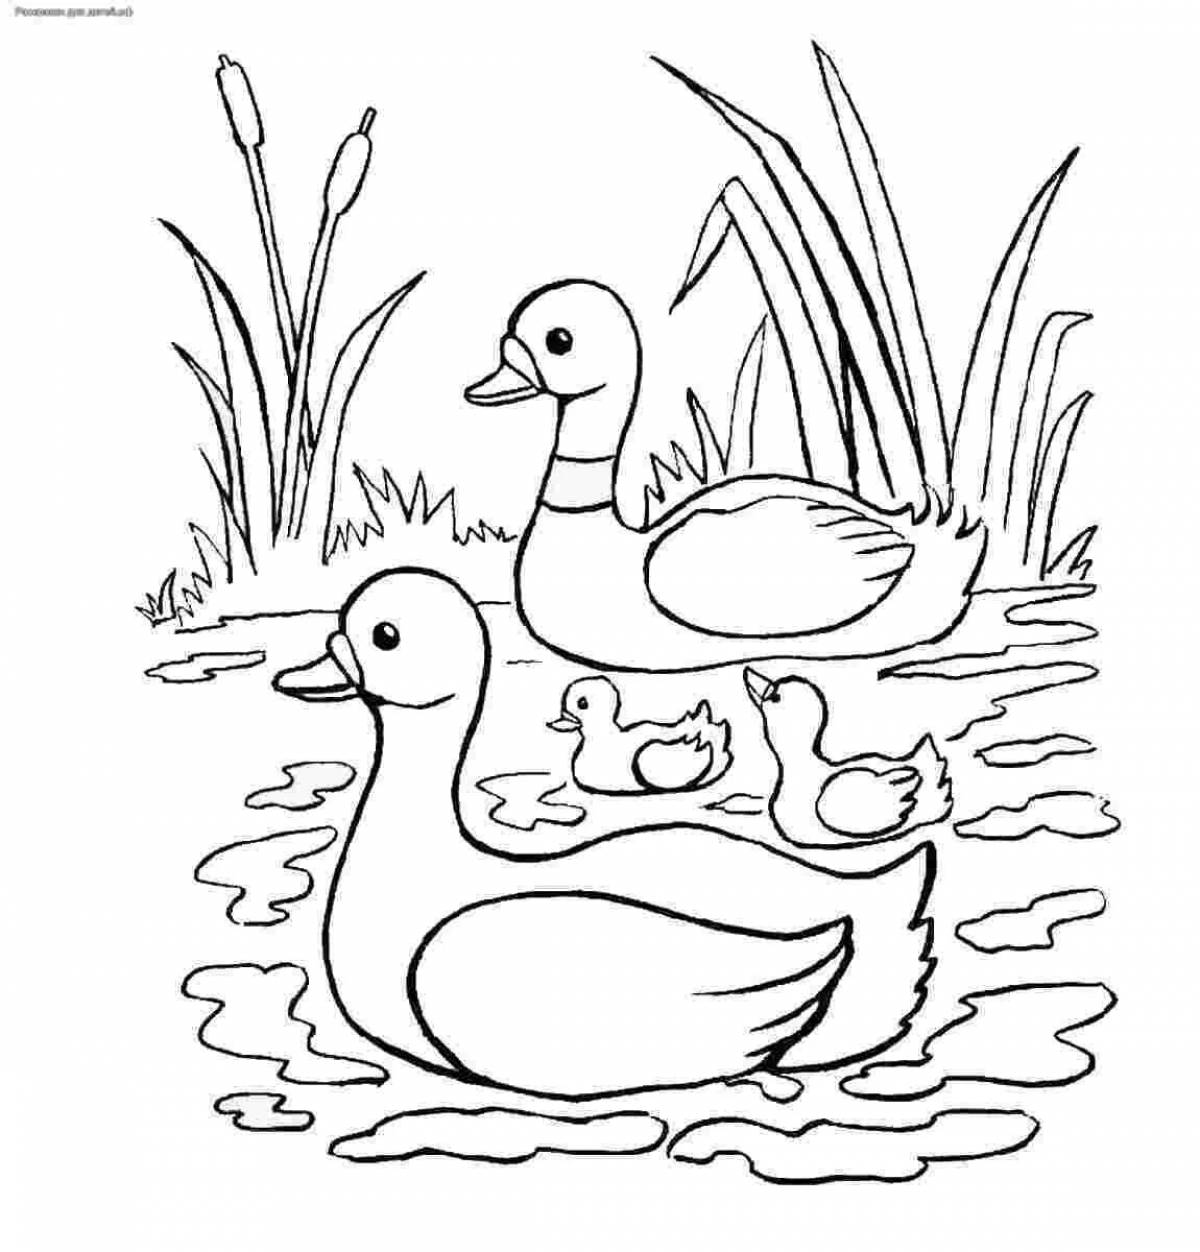 Duck with duck #8